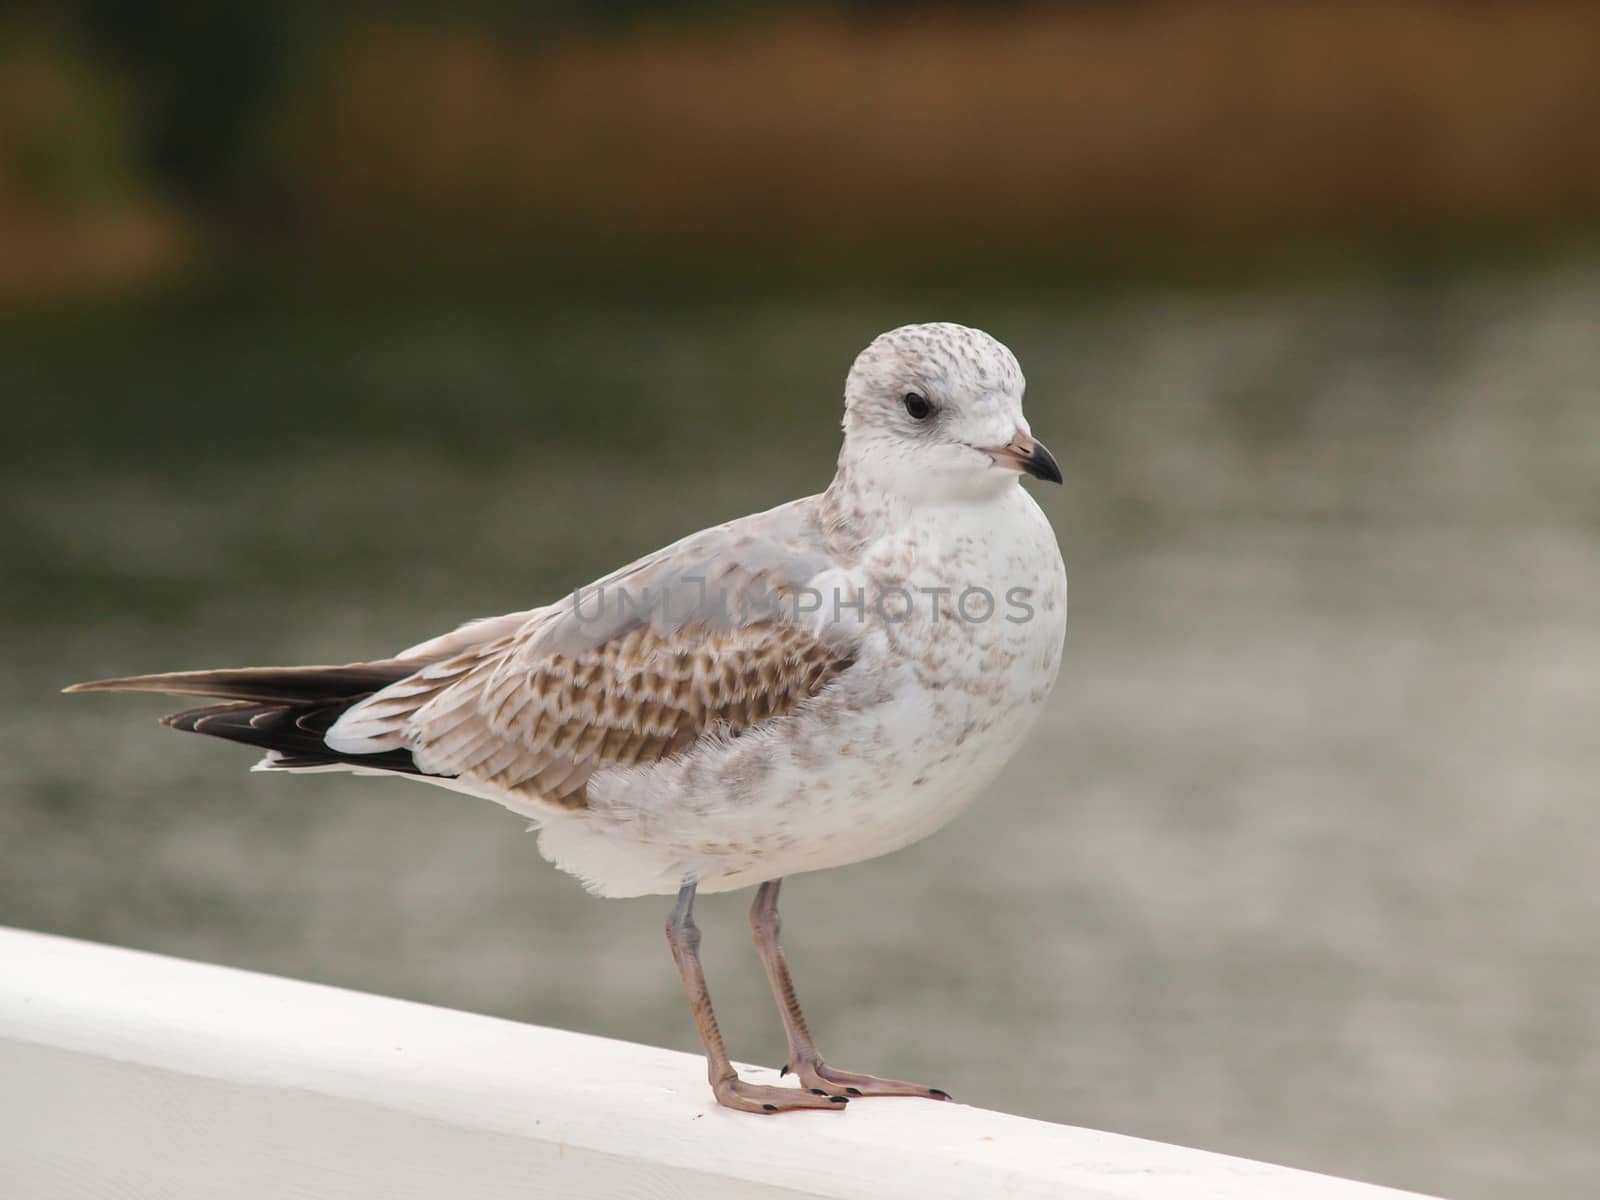 Young herring seagull standing on a white wall in front of shimmering water